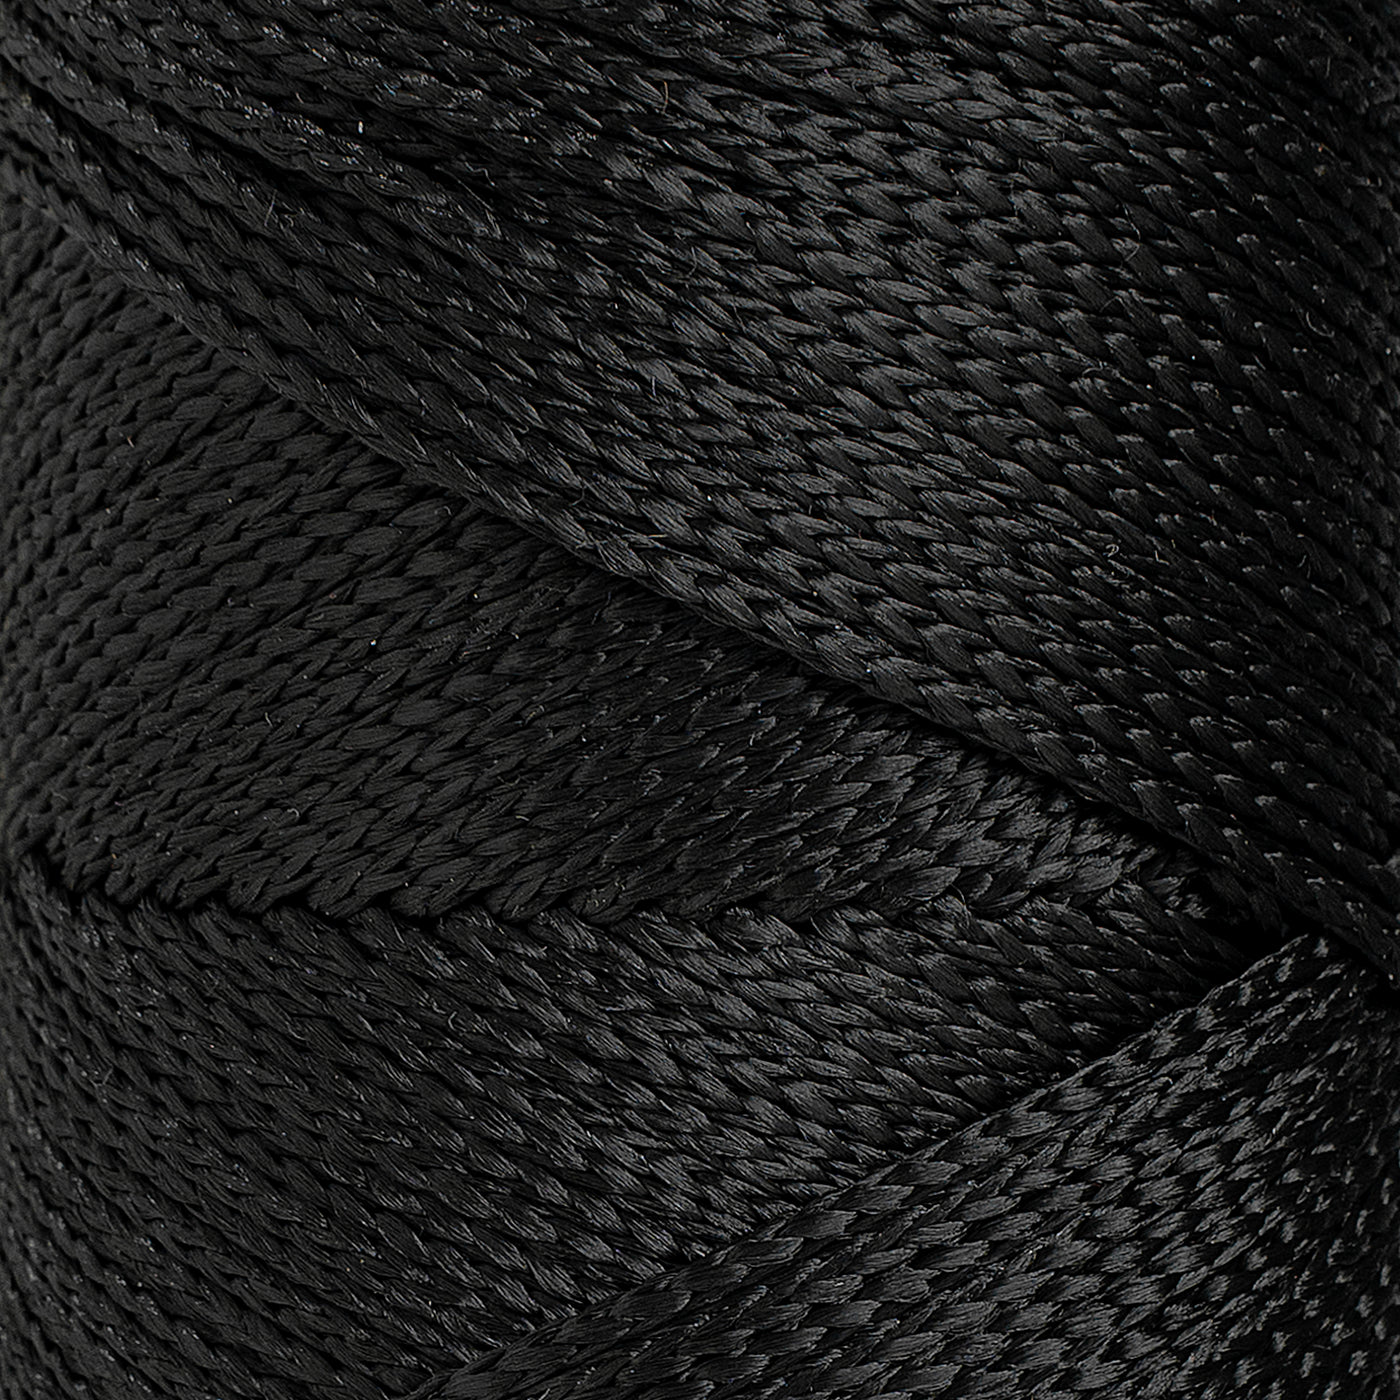 Outdoor 3 mm Macrame Braided Cord – Black Color